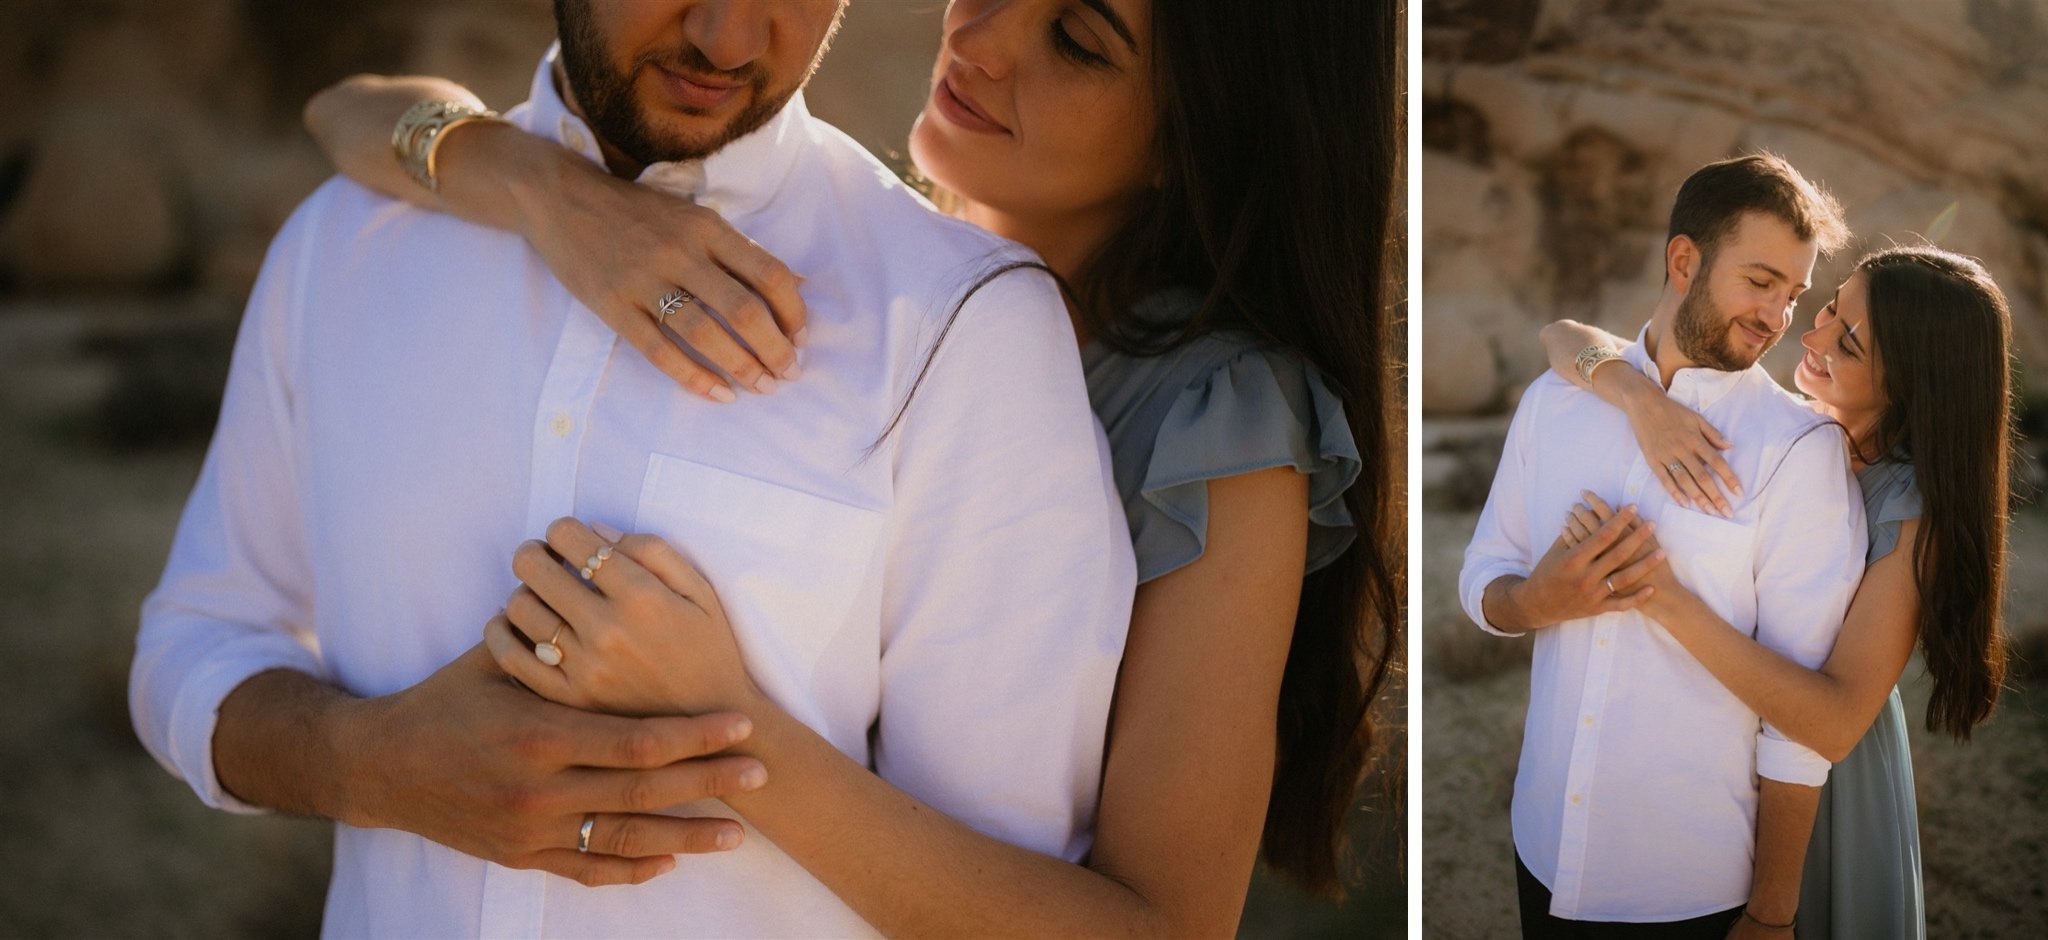 Joshua Tree Couples Session Surprise Proposal - Will Khoury Photography_27.jpg